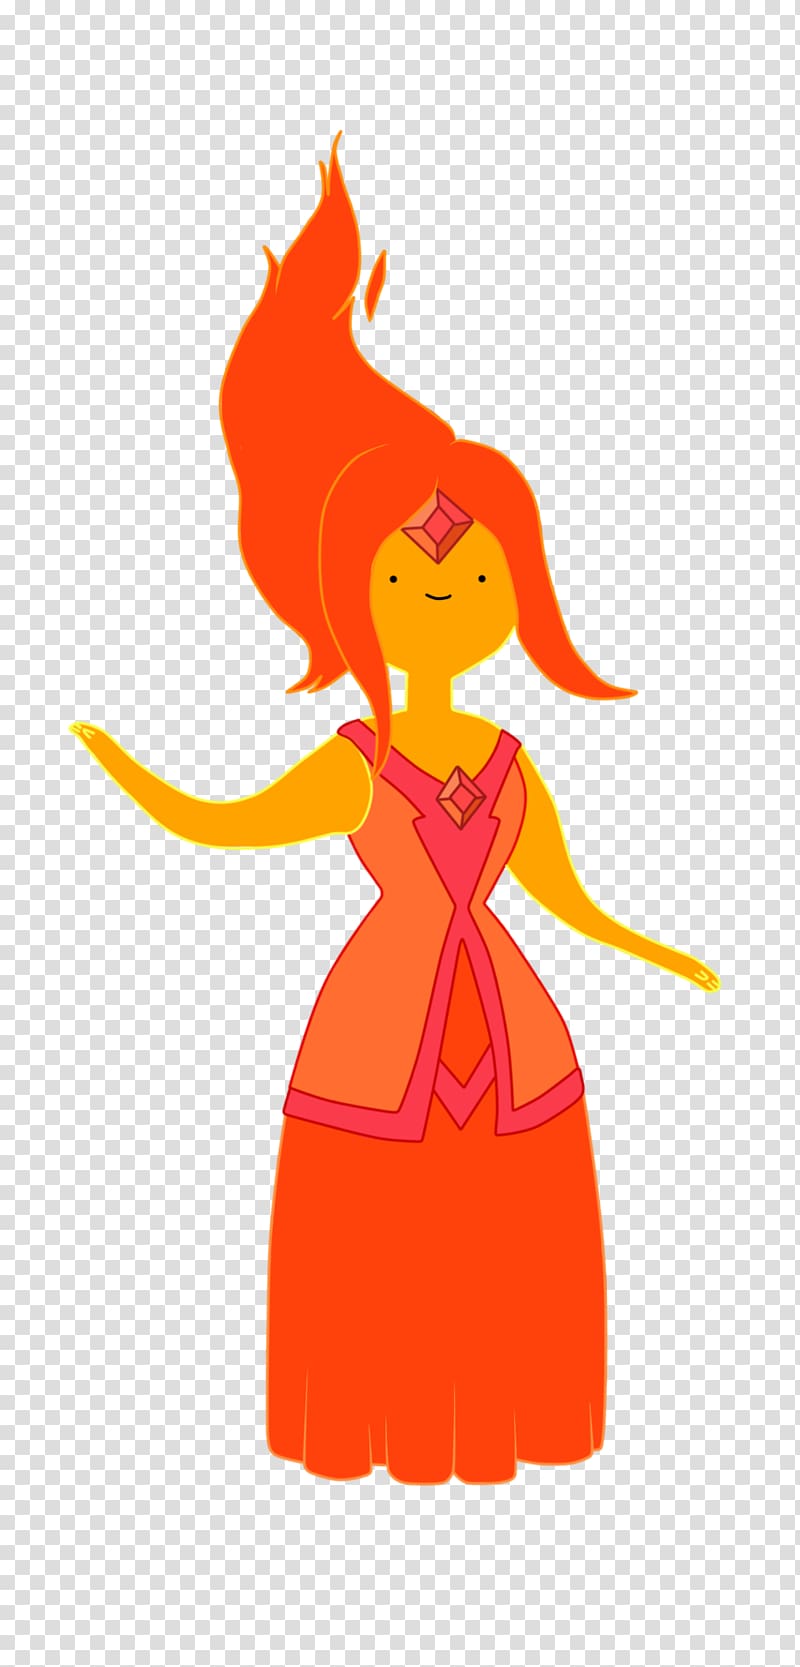 Flame Princess Marceline the Vampire Queen Finn the Human Adventure Time: Explore the Dungeon Because I Don\'t Know! Jake the Dog, finn the human transparent background PNG clipart